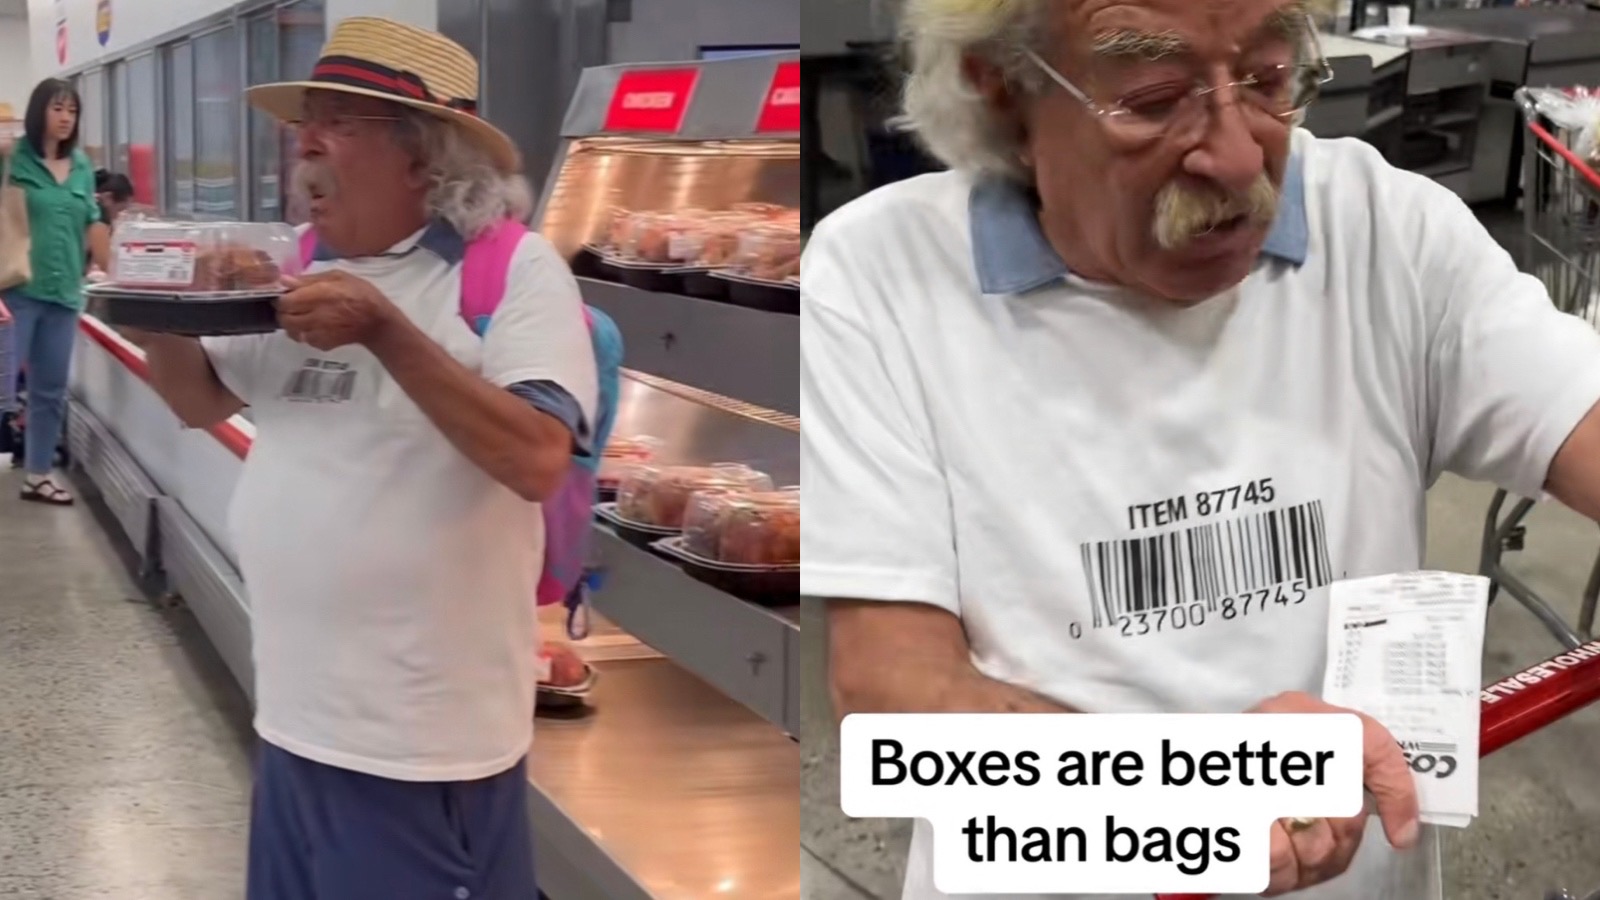 “Costco oracle” goes viral for wearing rotisserie chicken barcode on shirt to avoid LED ‘poison’